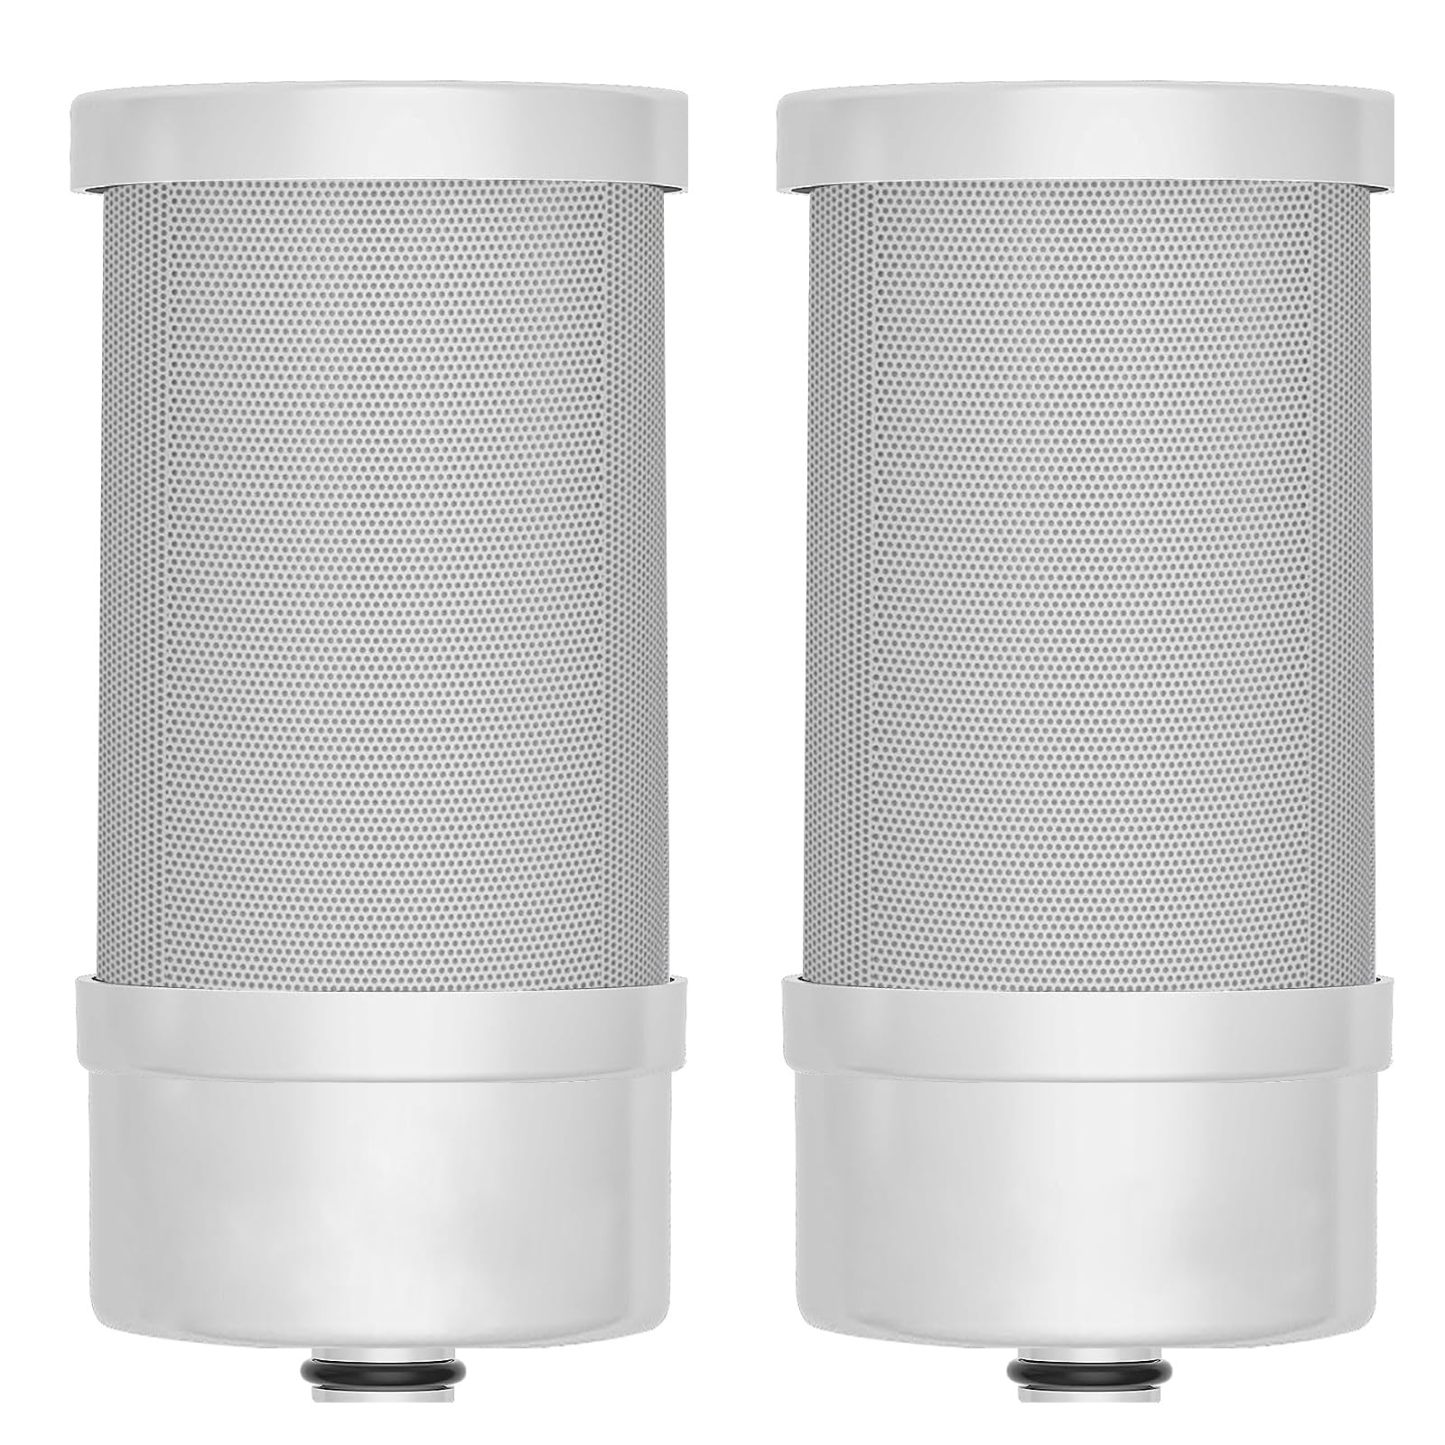 Replacement Filter for T5 Faucet Water, 3-6 Months Lifetime, Reduces Chlorine, Taste and Odor (2 PACK)